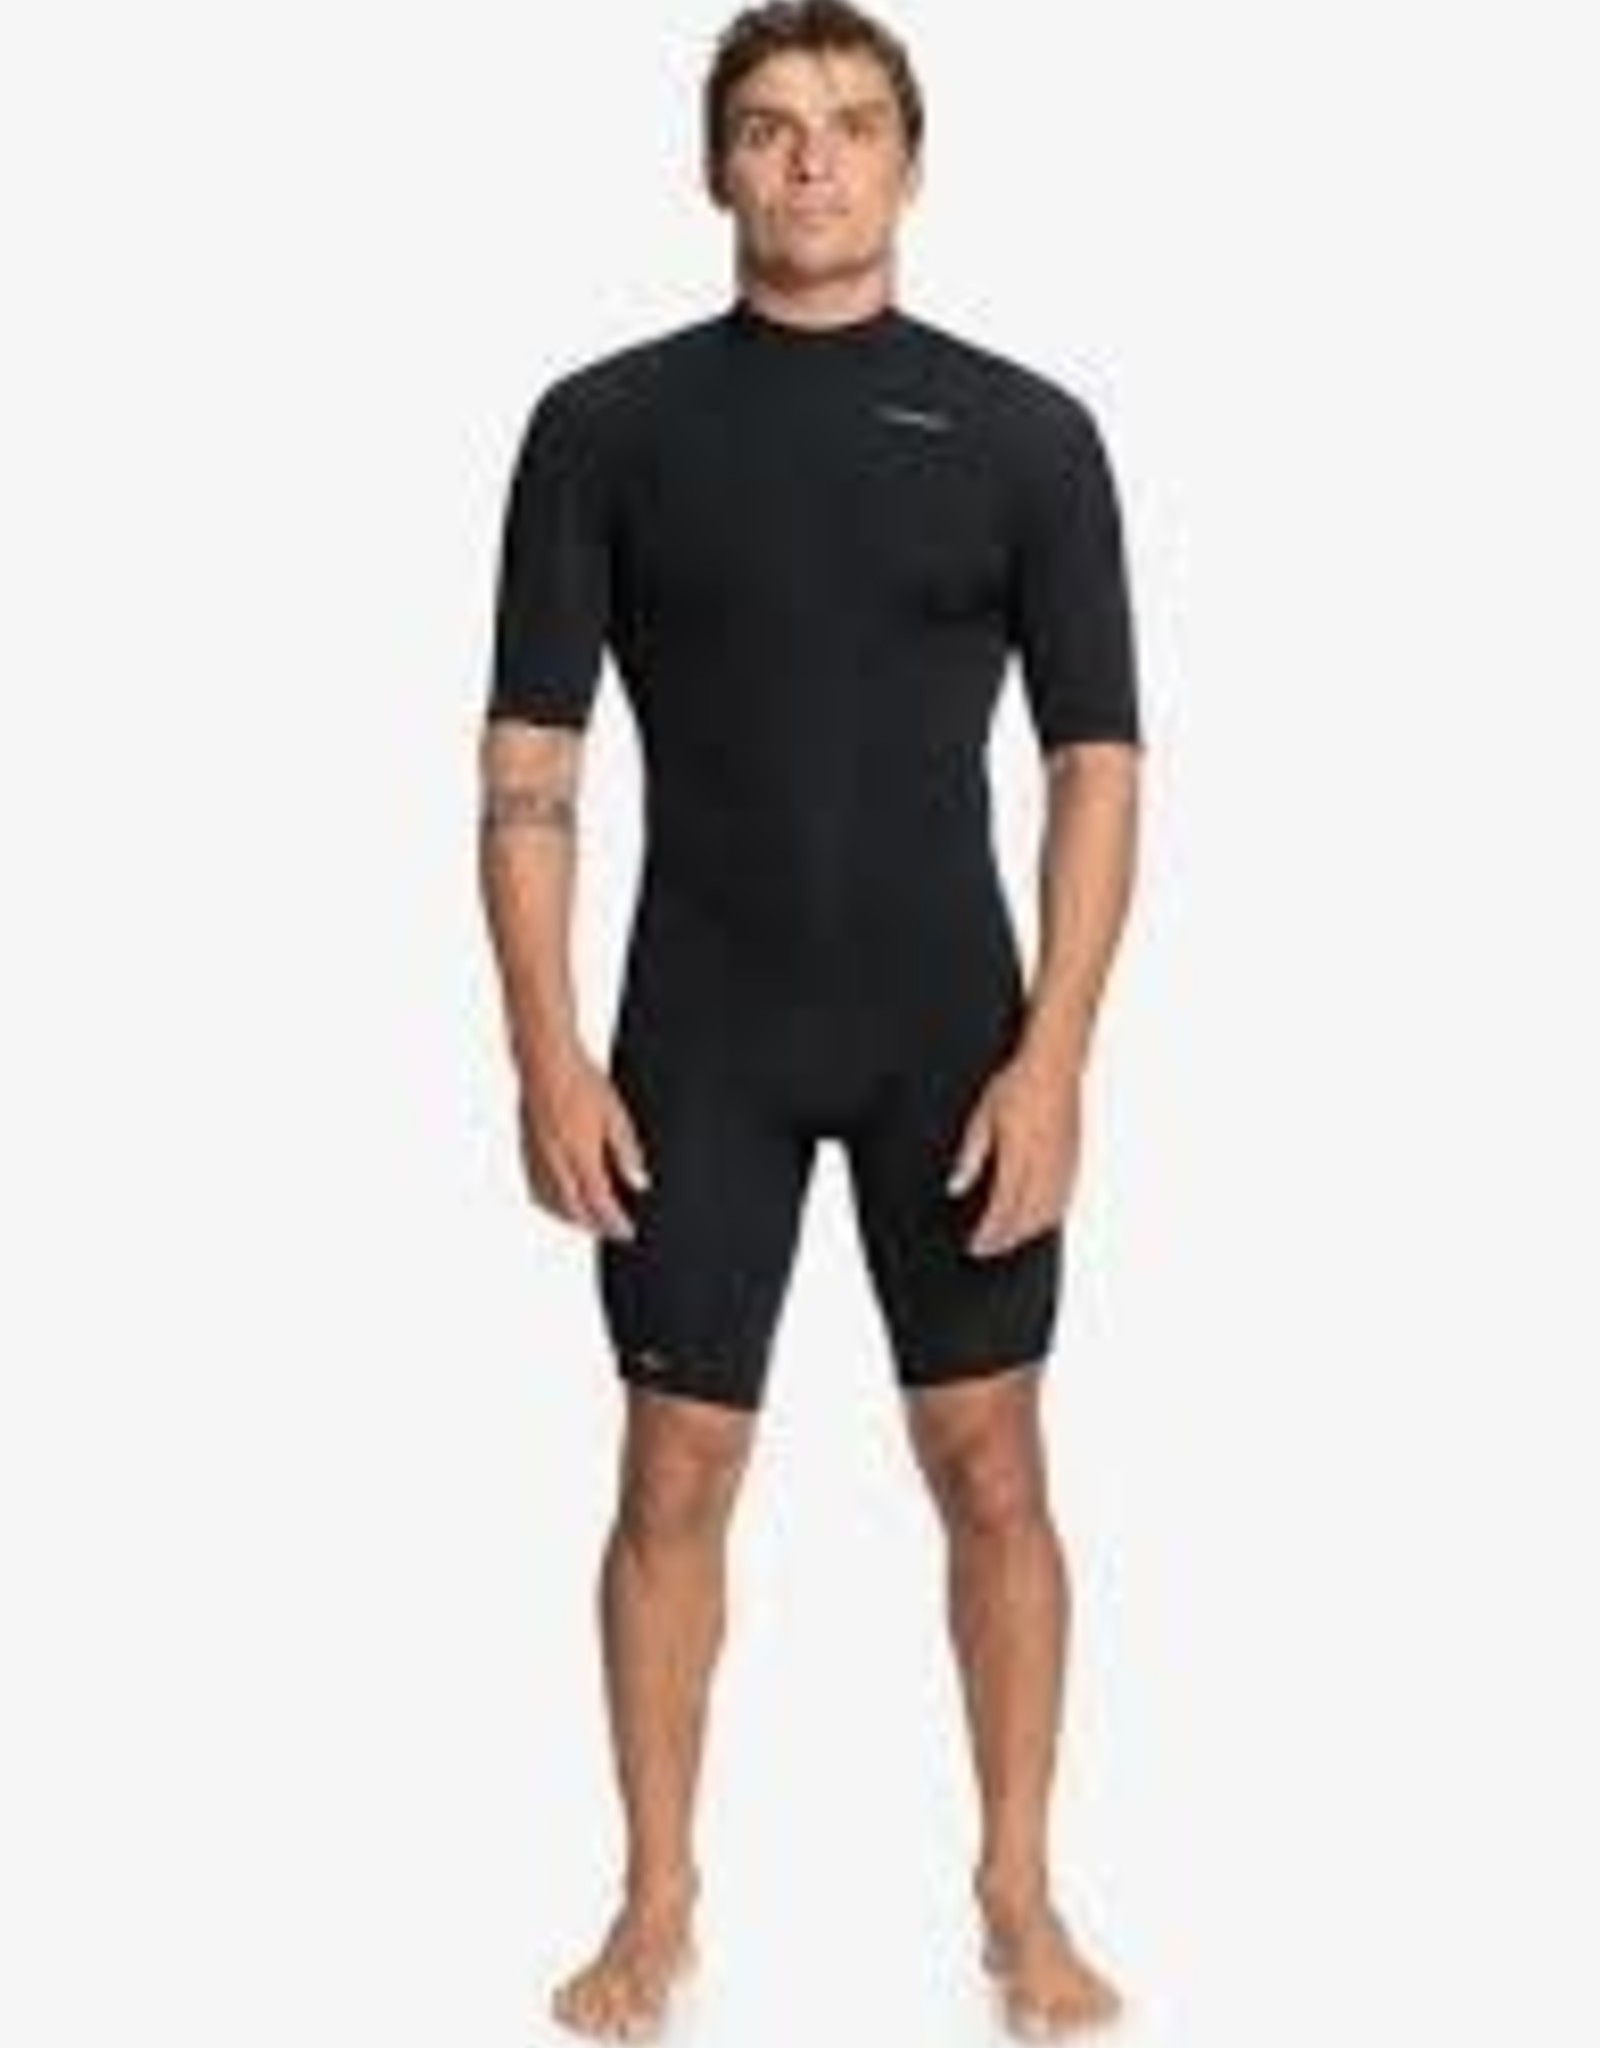 quiksilver quiksilver everyday sessions springsuit 2/2mm